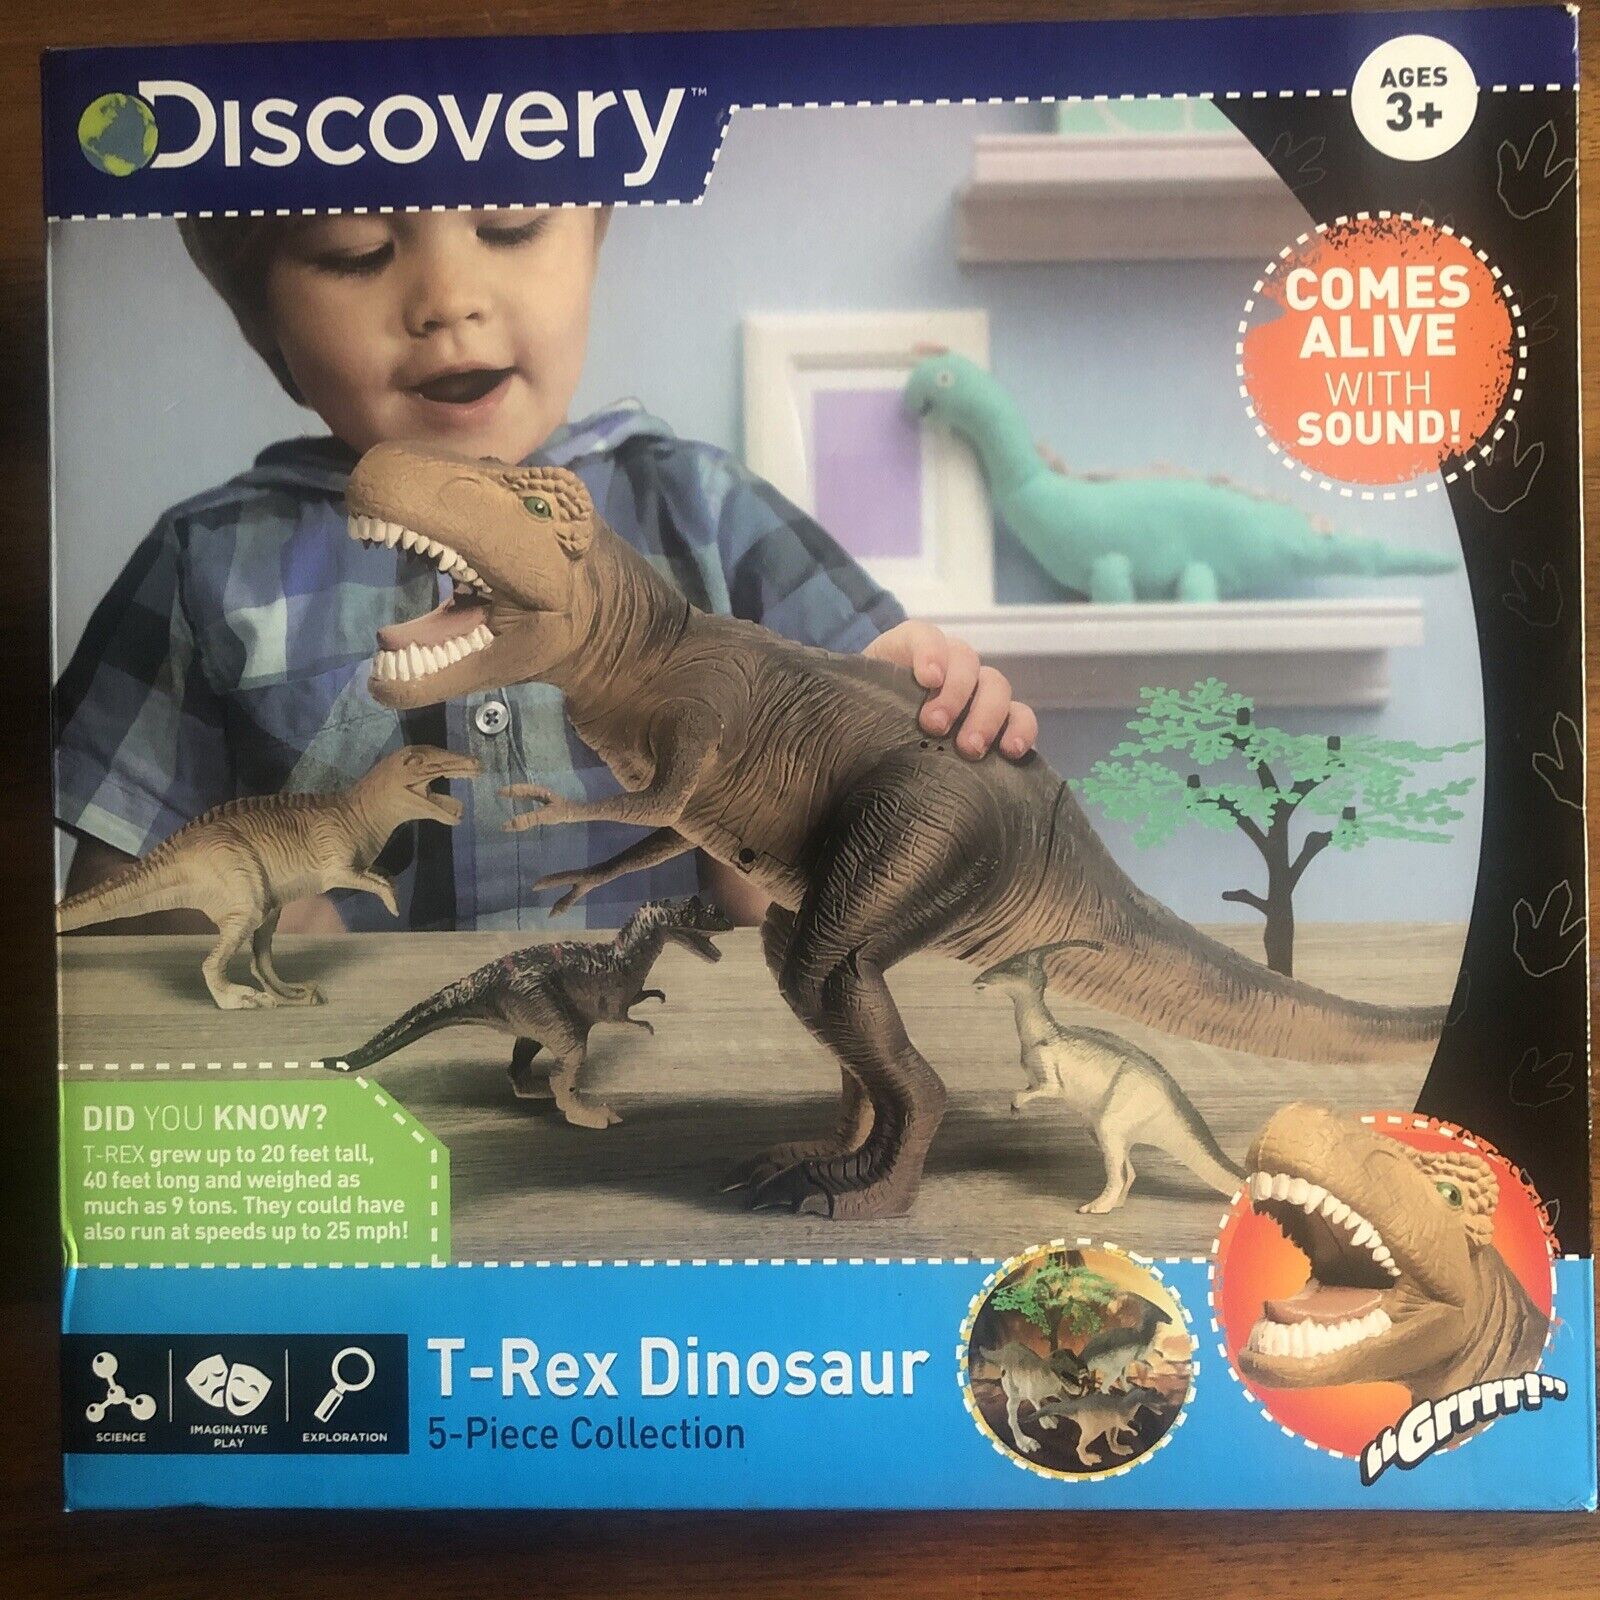 NEW Discovery Kids T-Rex Dinosaur Comes Raleigh Mall 5 Super intense SALE Piece Alive Collection